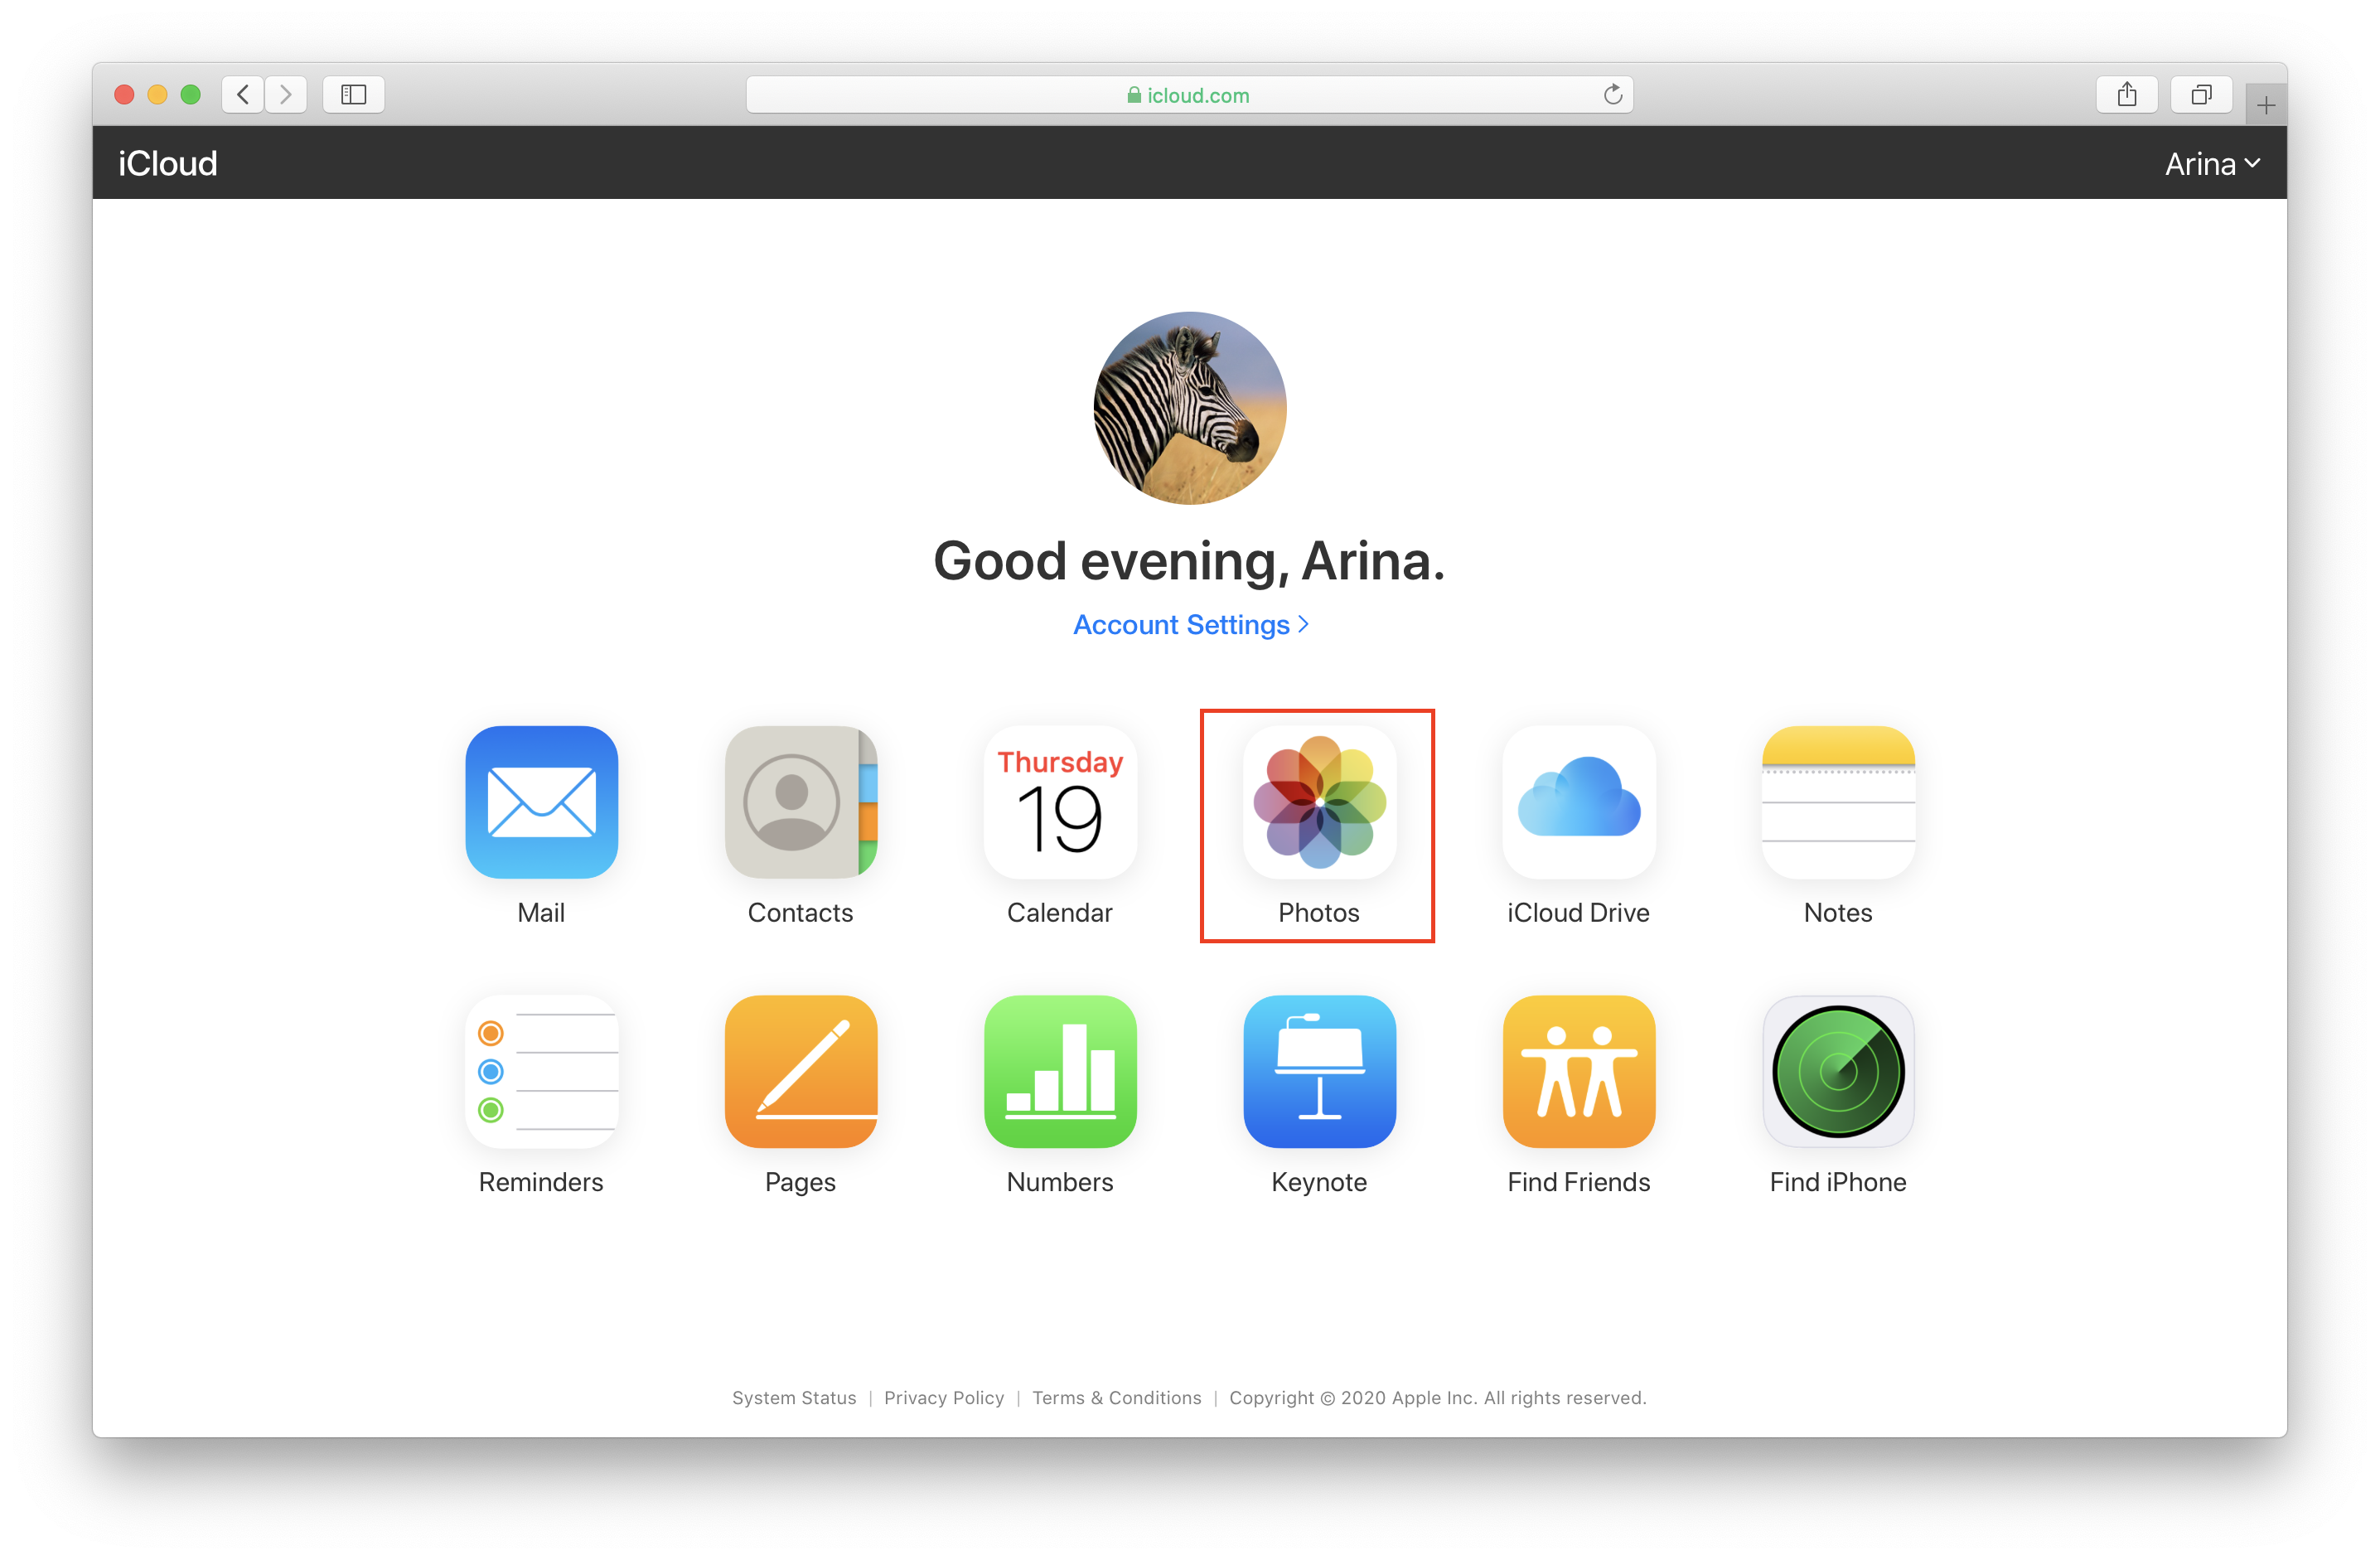 iCloud page in web browser